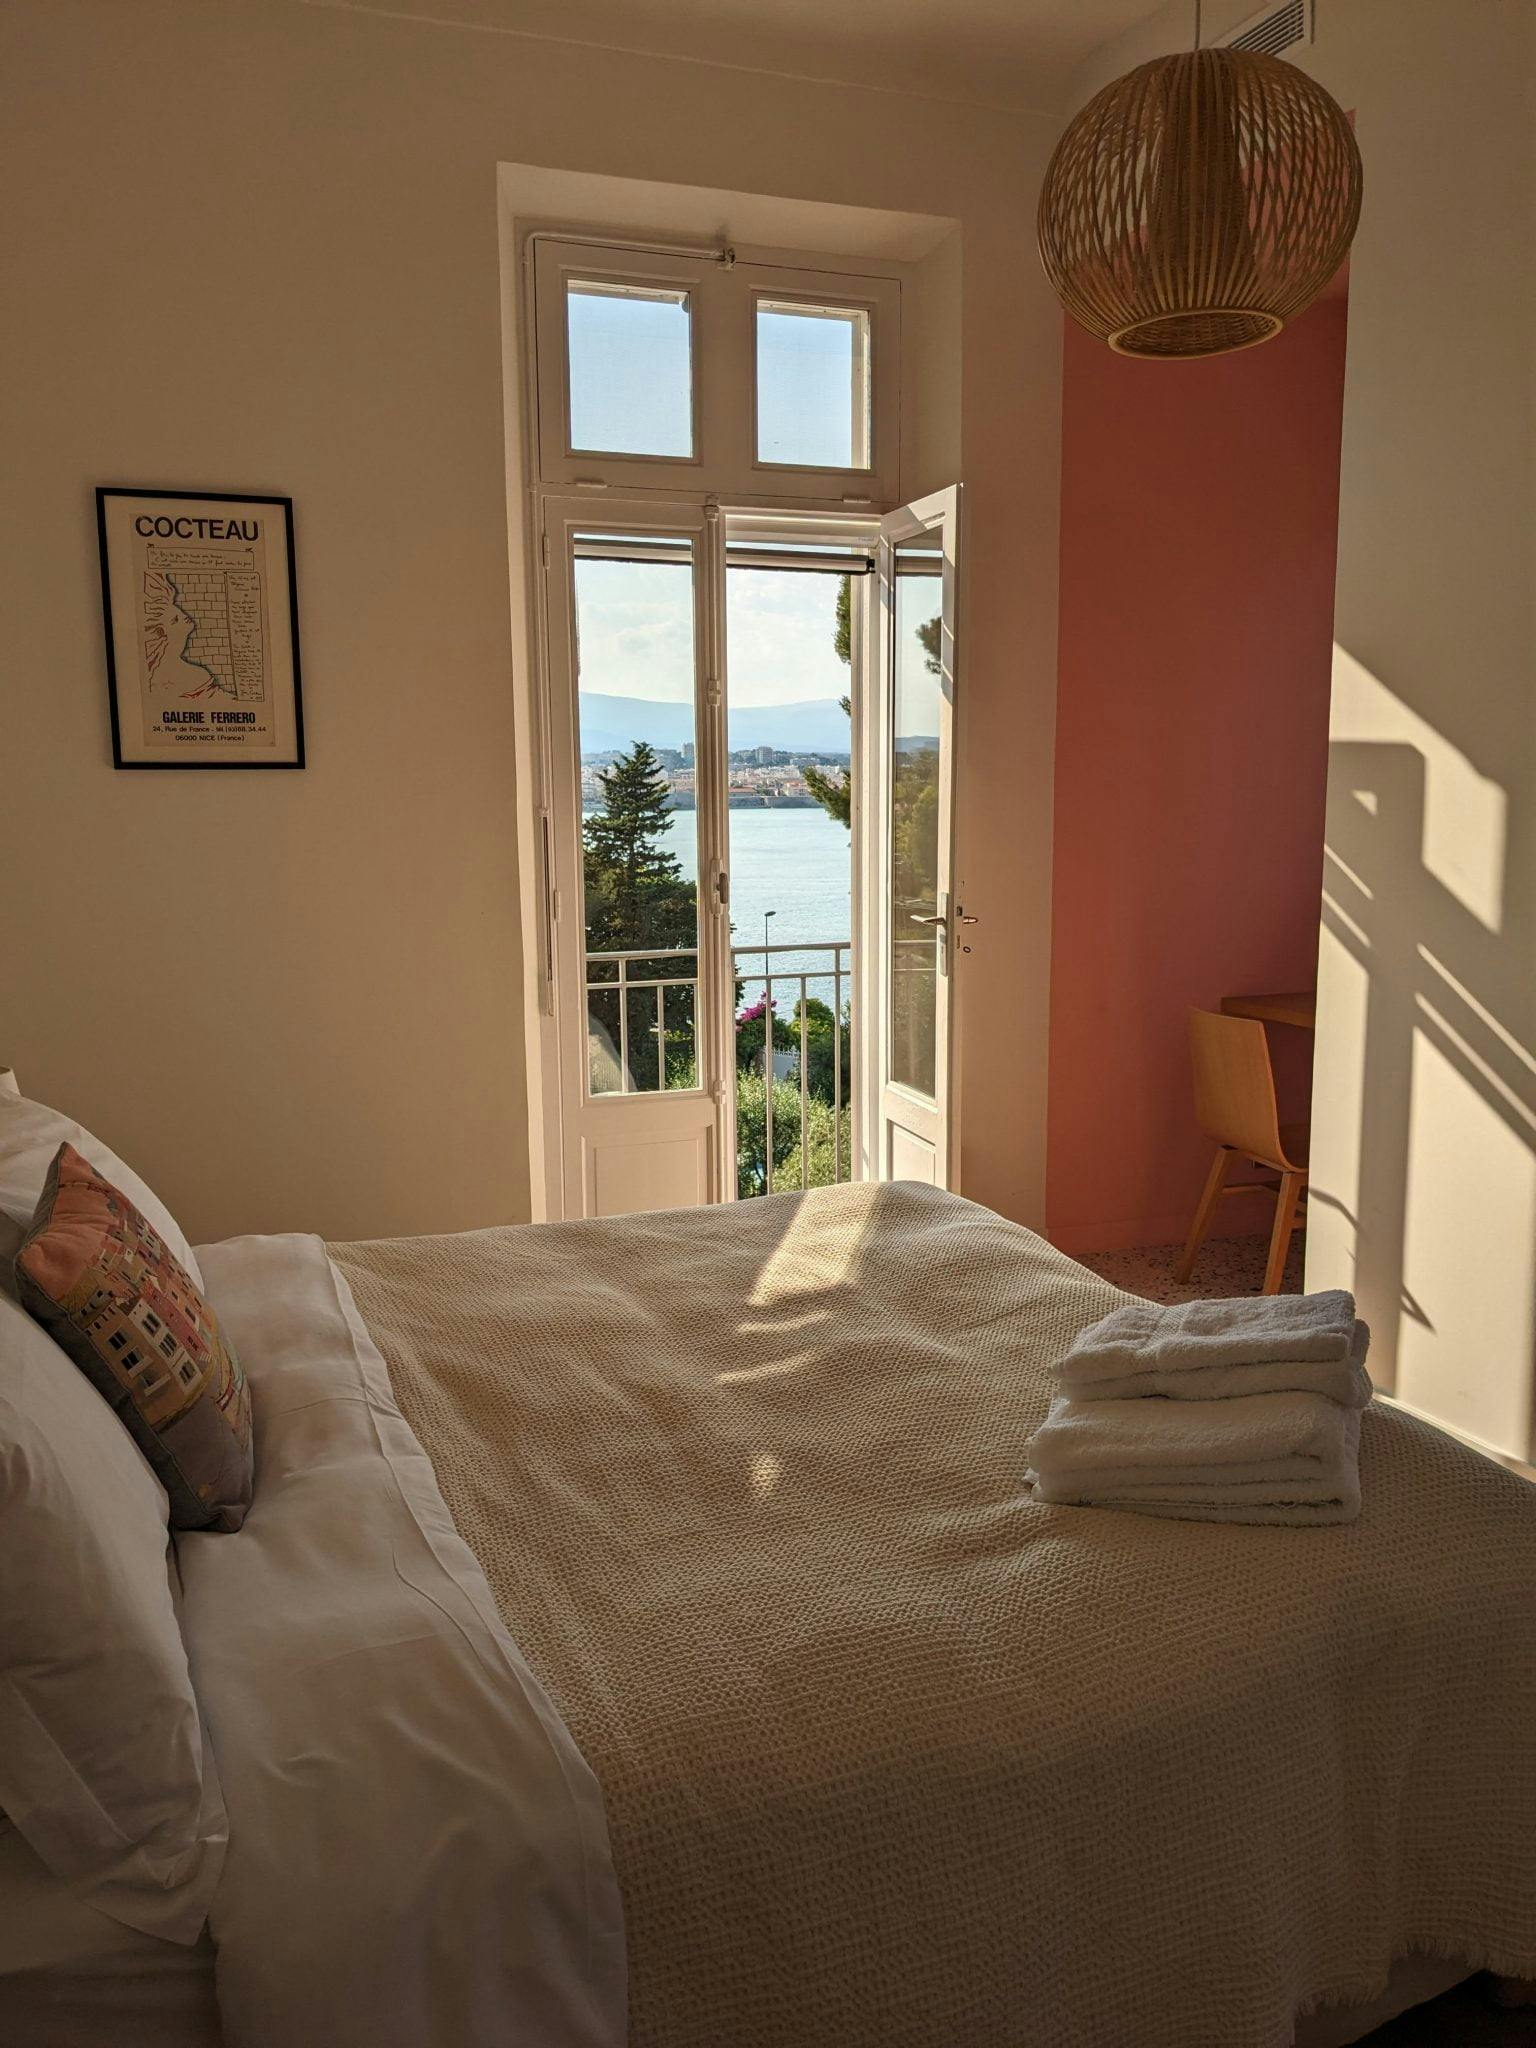 Sunbeam in the pink bedroom, bed made with towels laid on top, beautiful light